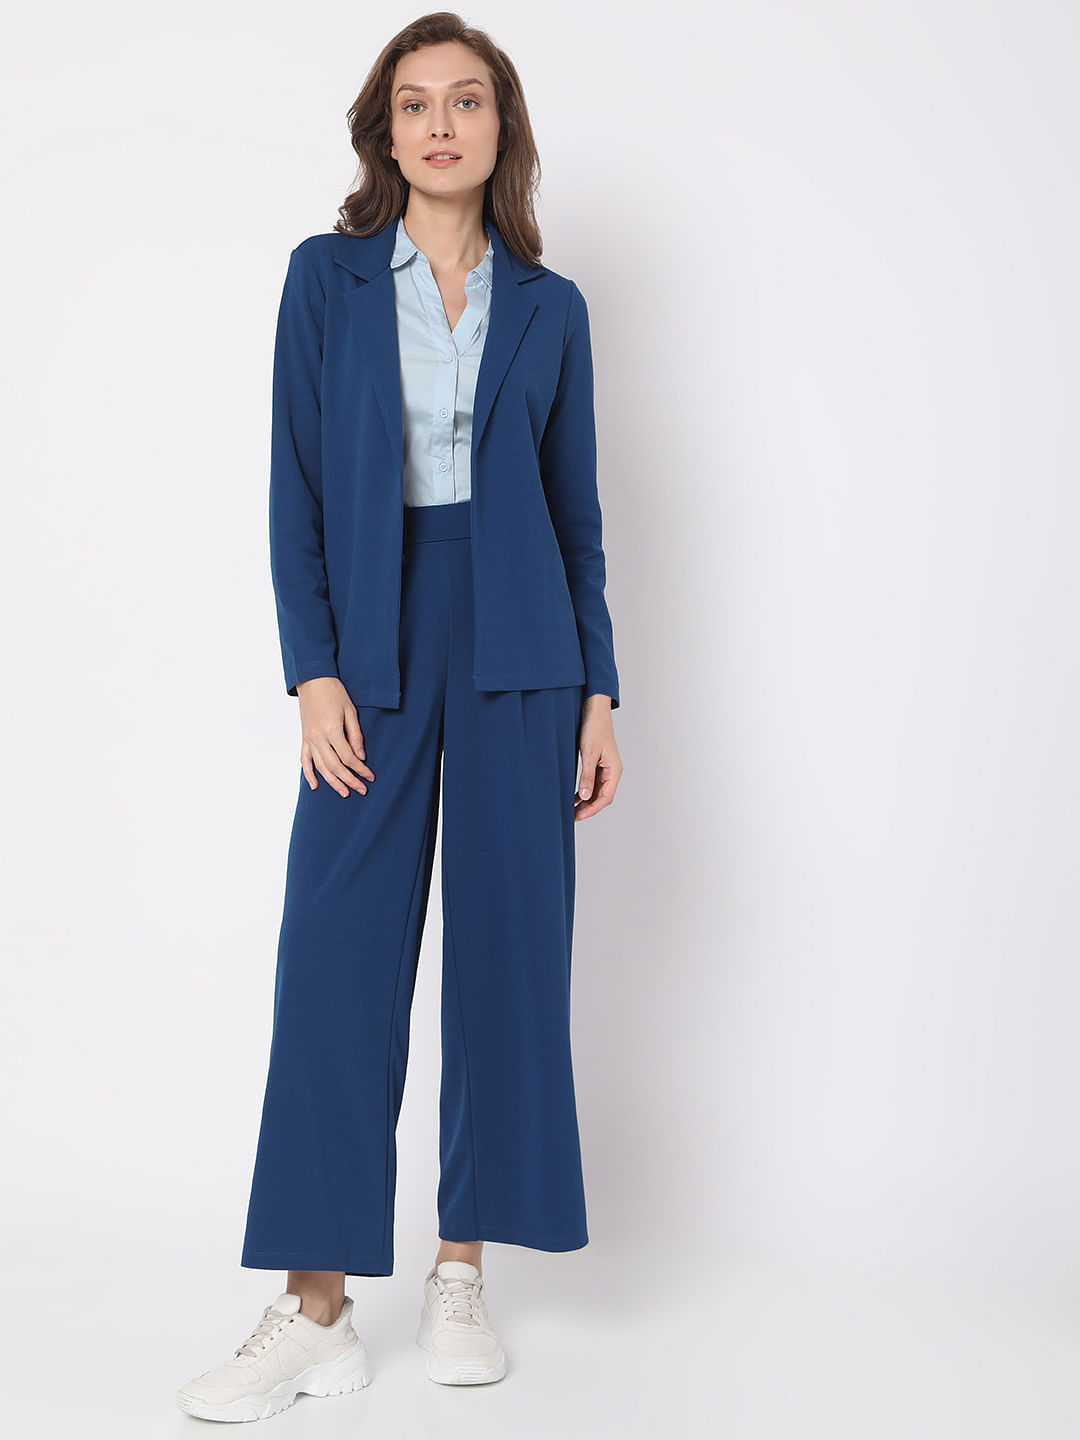 Womens Suits  Tailored Blazers  Trousers  Jigsaw